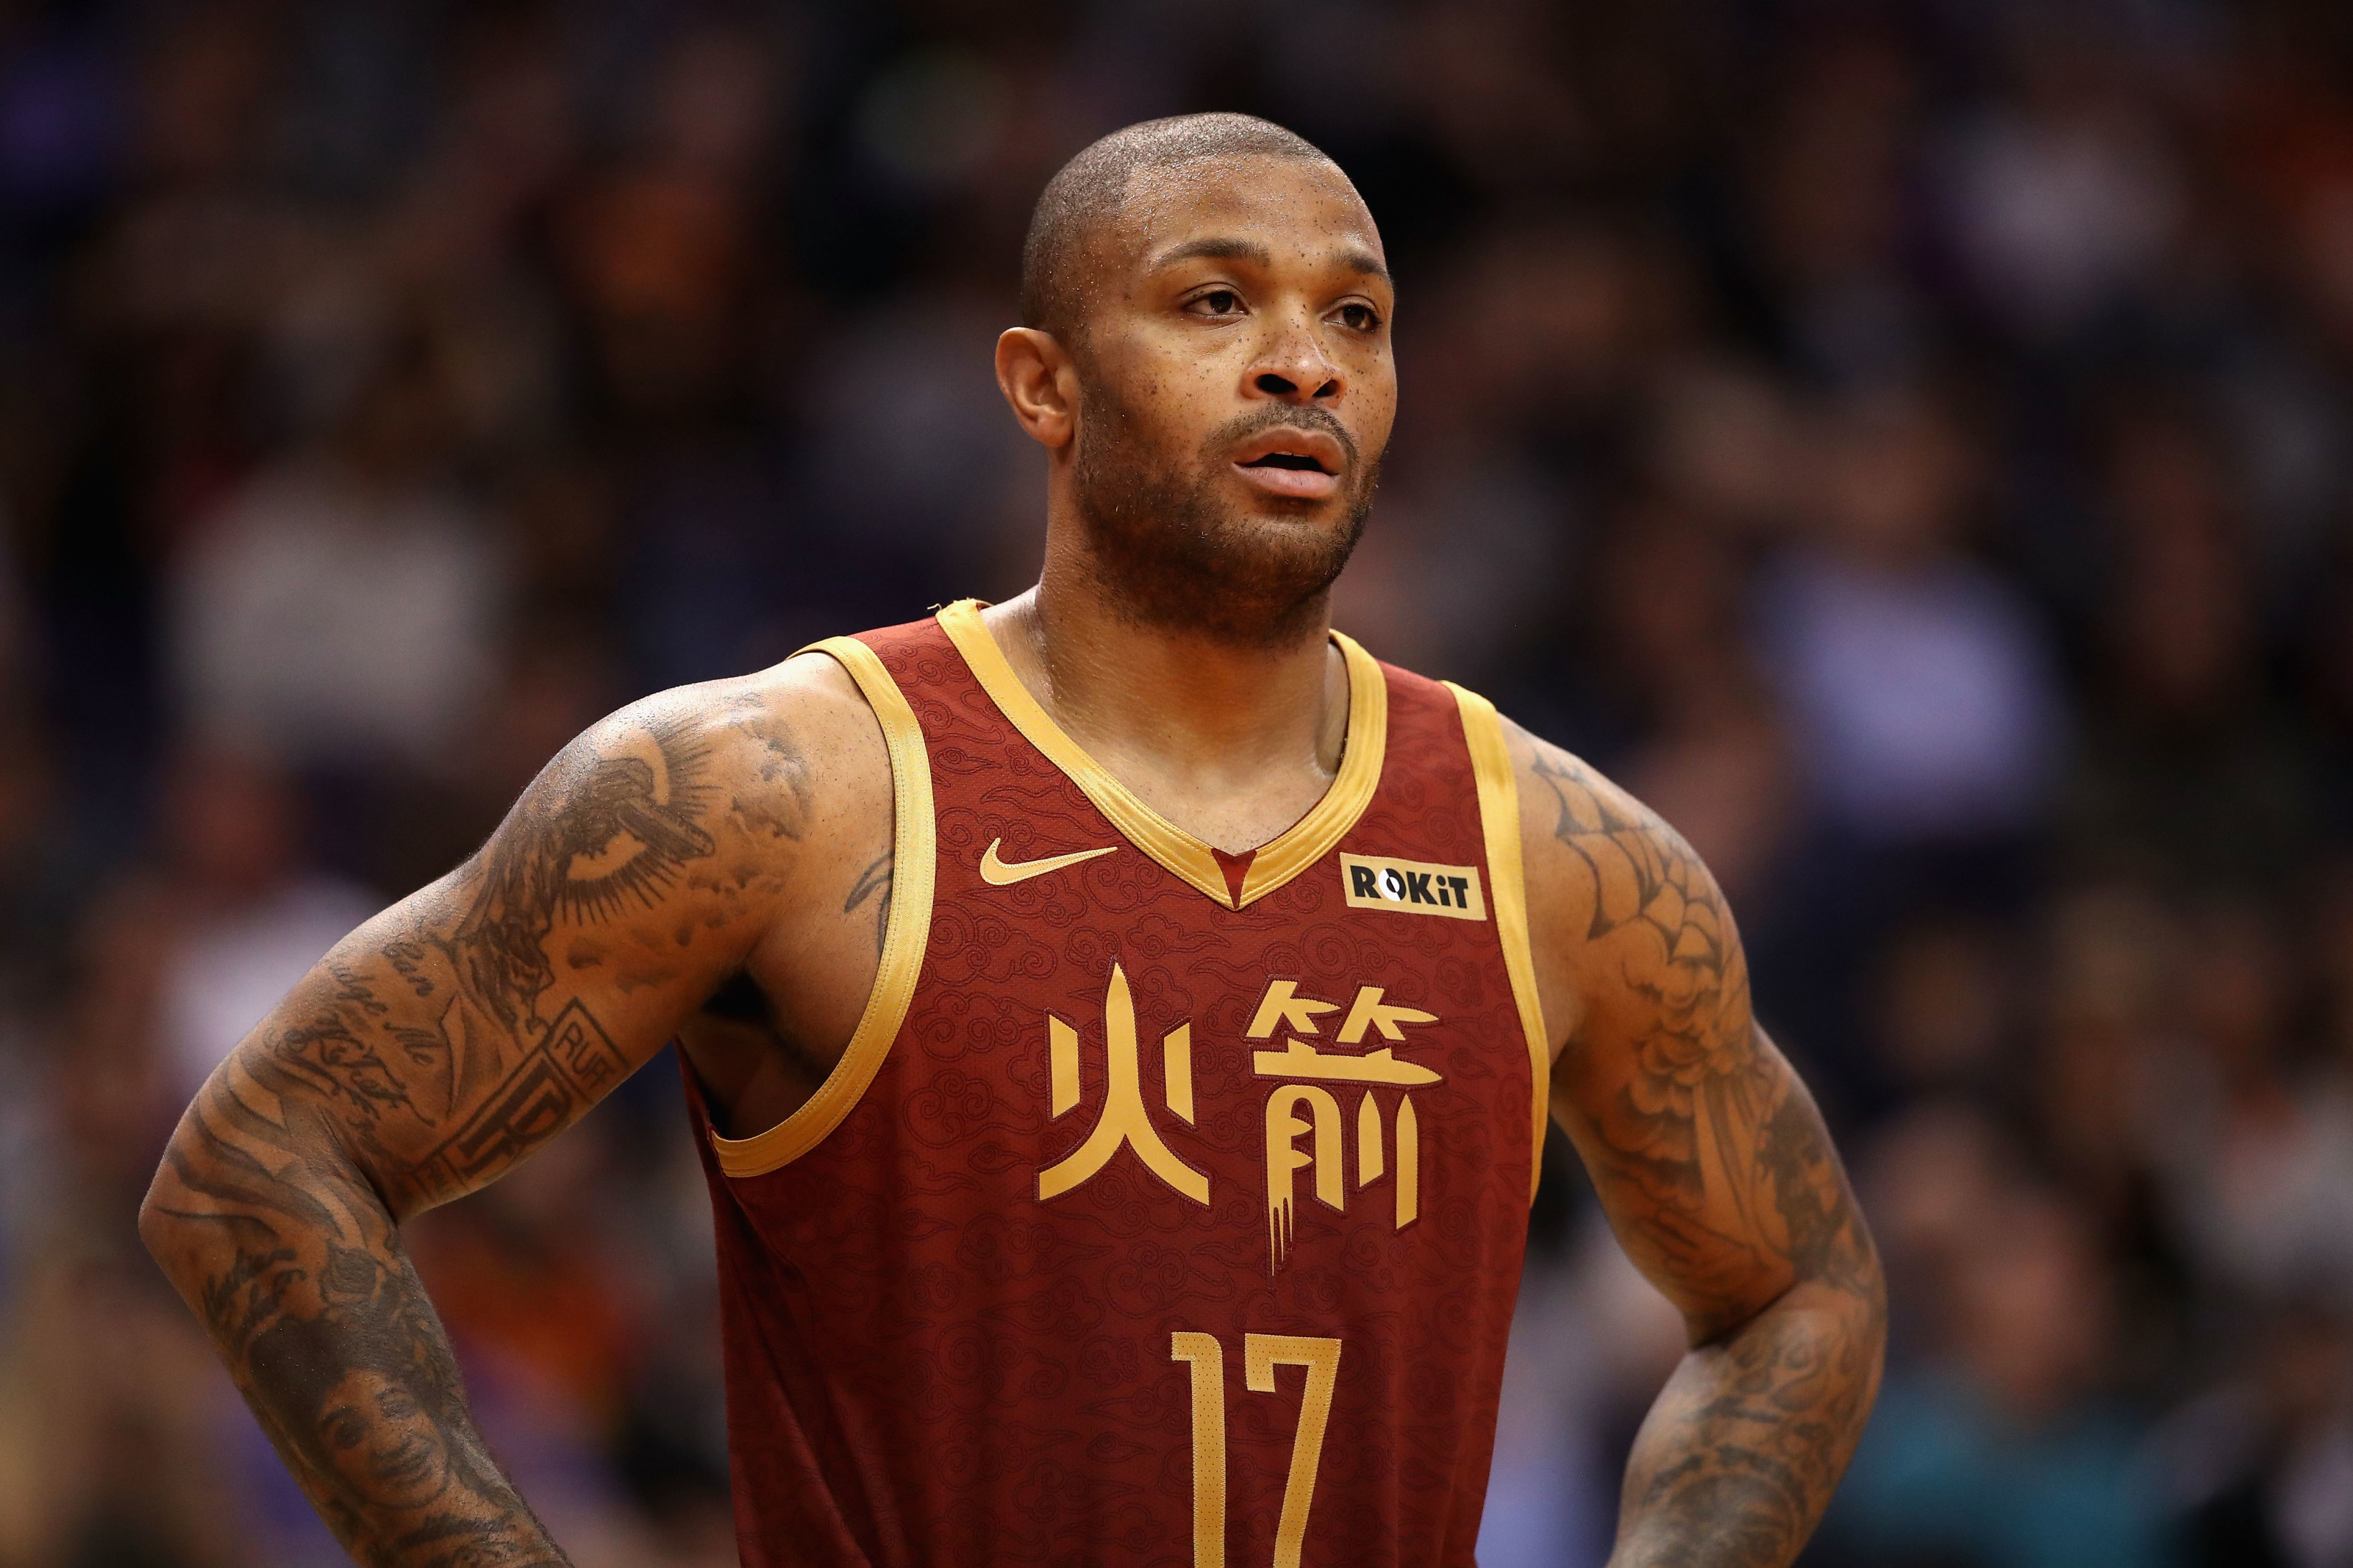 Rockets officially sign PJ Tucker, take Beverley's old jersey number